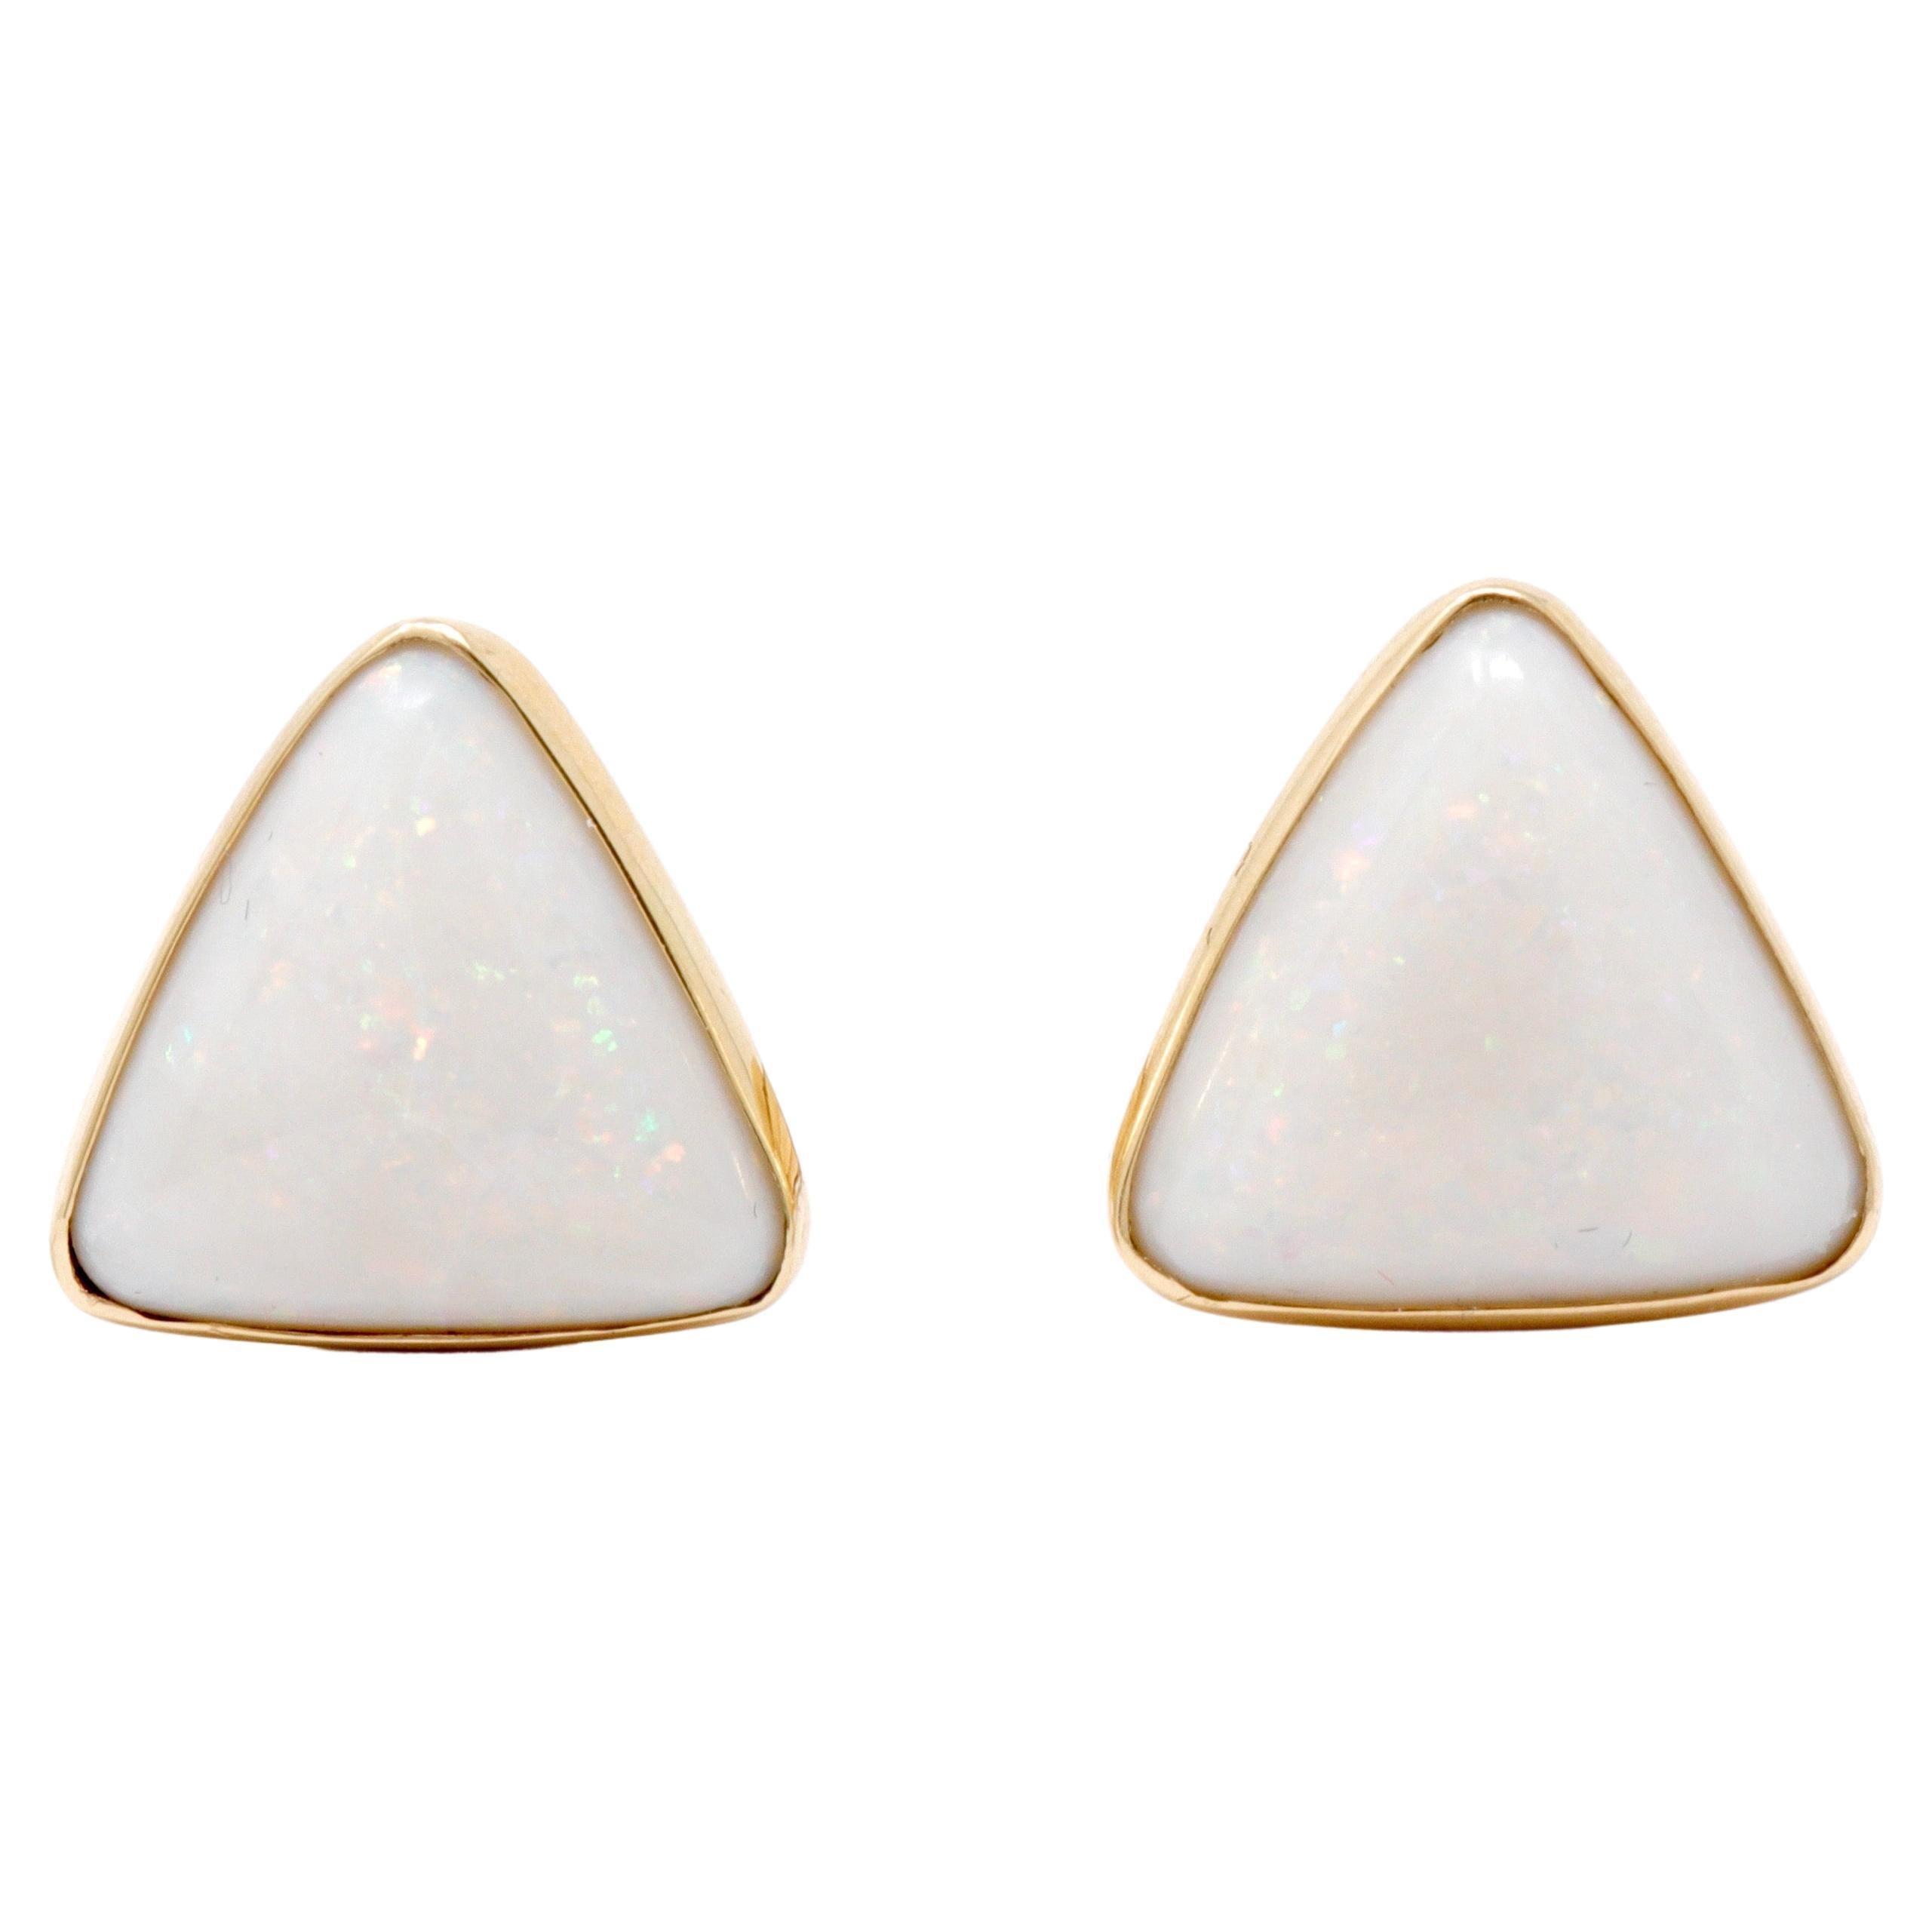 Vintage 14K Yellow Gold and White Opal Cufflinks.